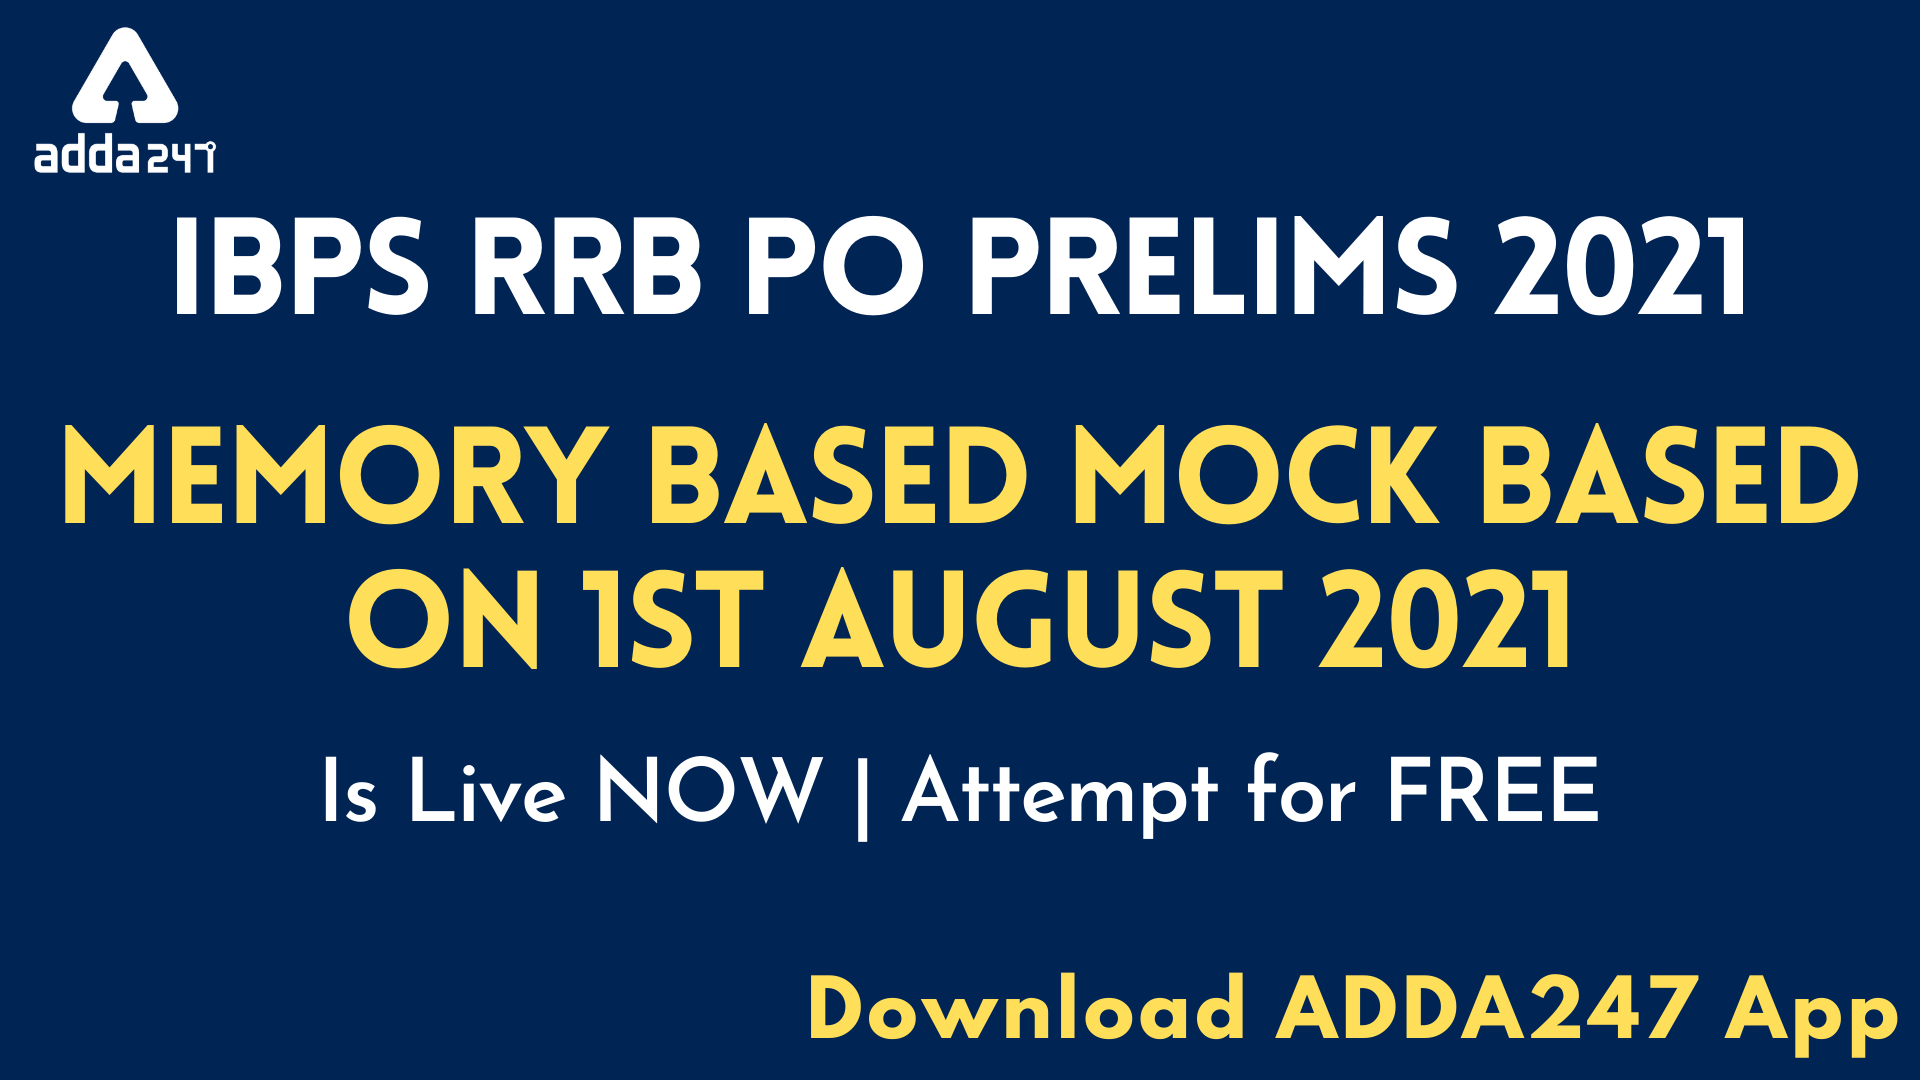 IBPS RRB PO PRELIMS 2021 | MEMORY BASED MOCK is LIVE NOW | Attempt for Free on Adda247 App_40.1